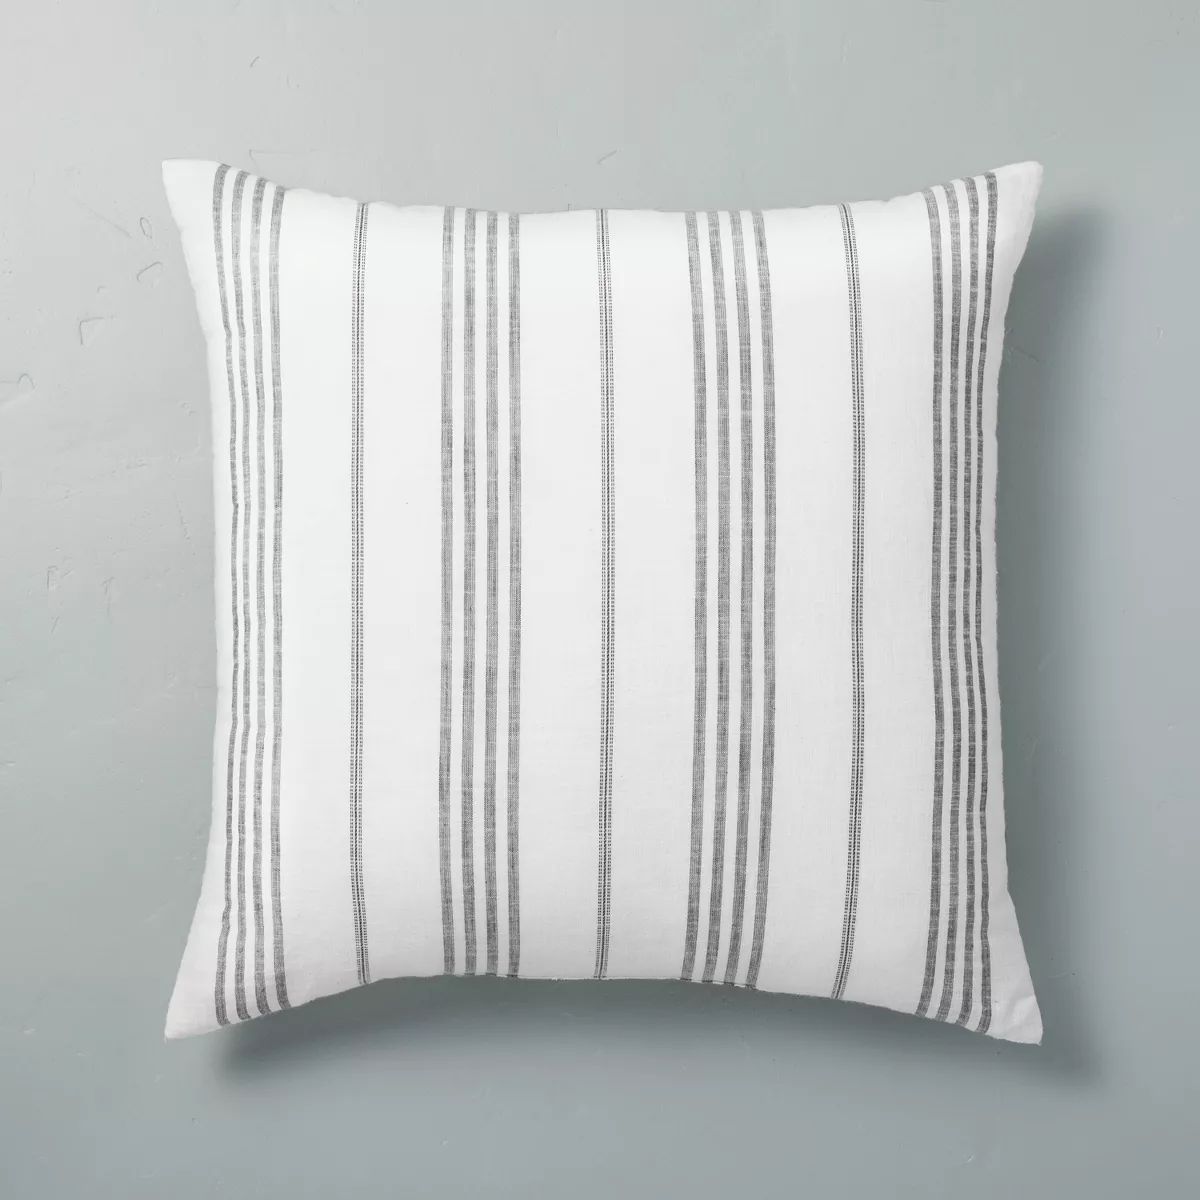 24"x24" Vertical Stripe Oversized Throw Pillow Sour Cream/Gray - Hearth & Hand™ with Magnolia | Target